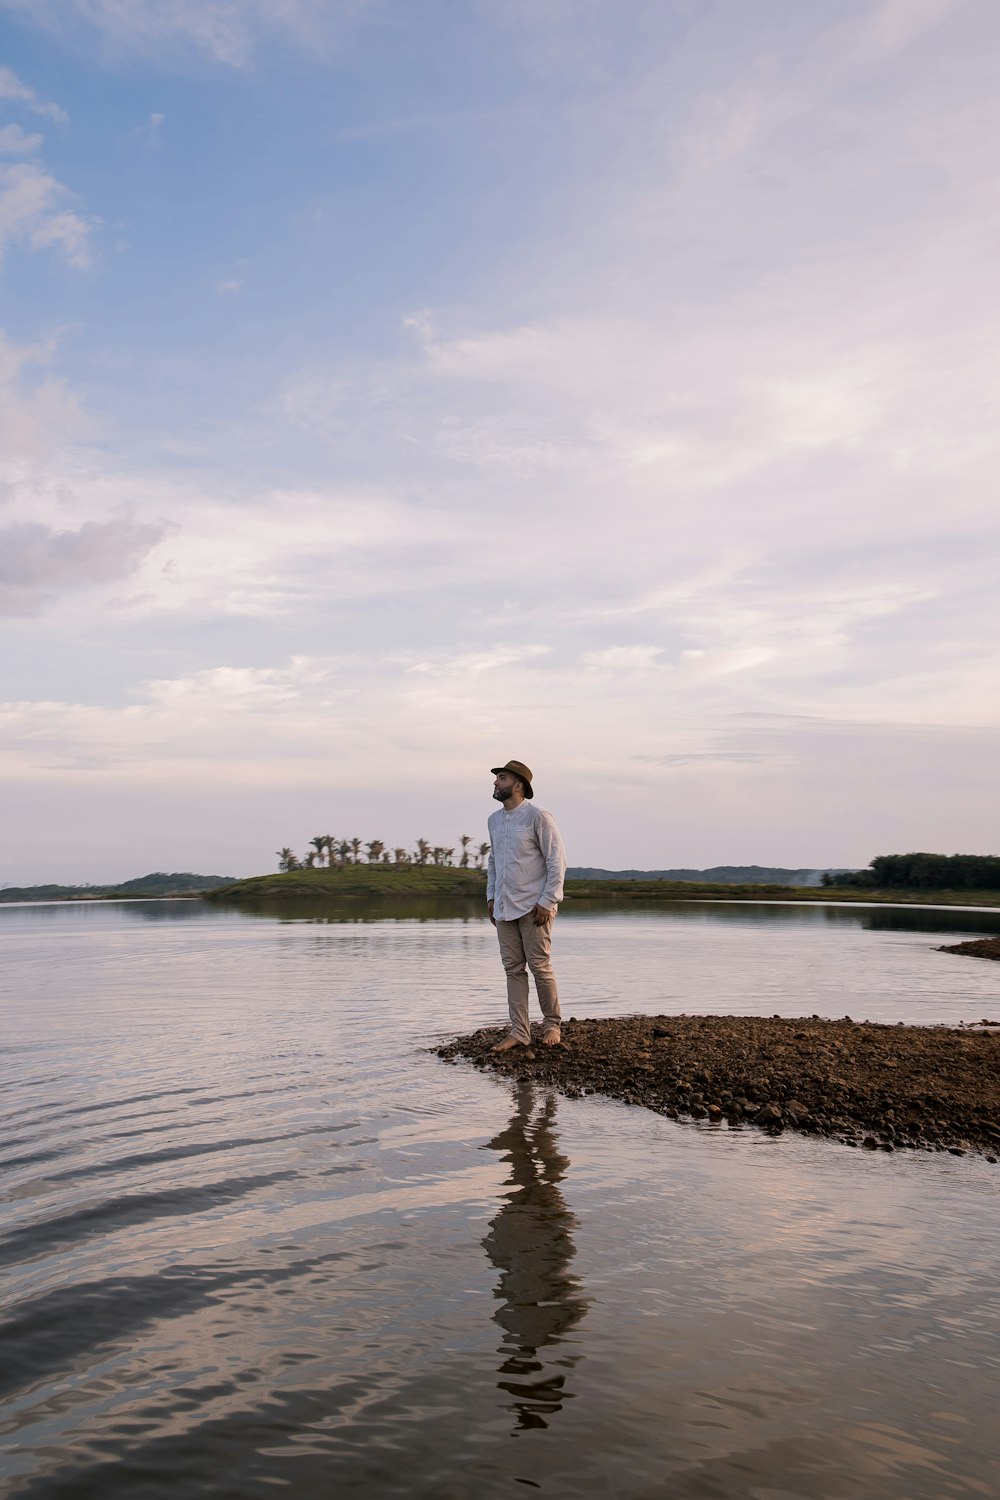 man in white shirt standing on brown rock near body of water during daytime